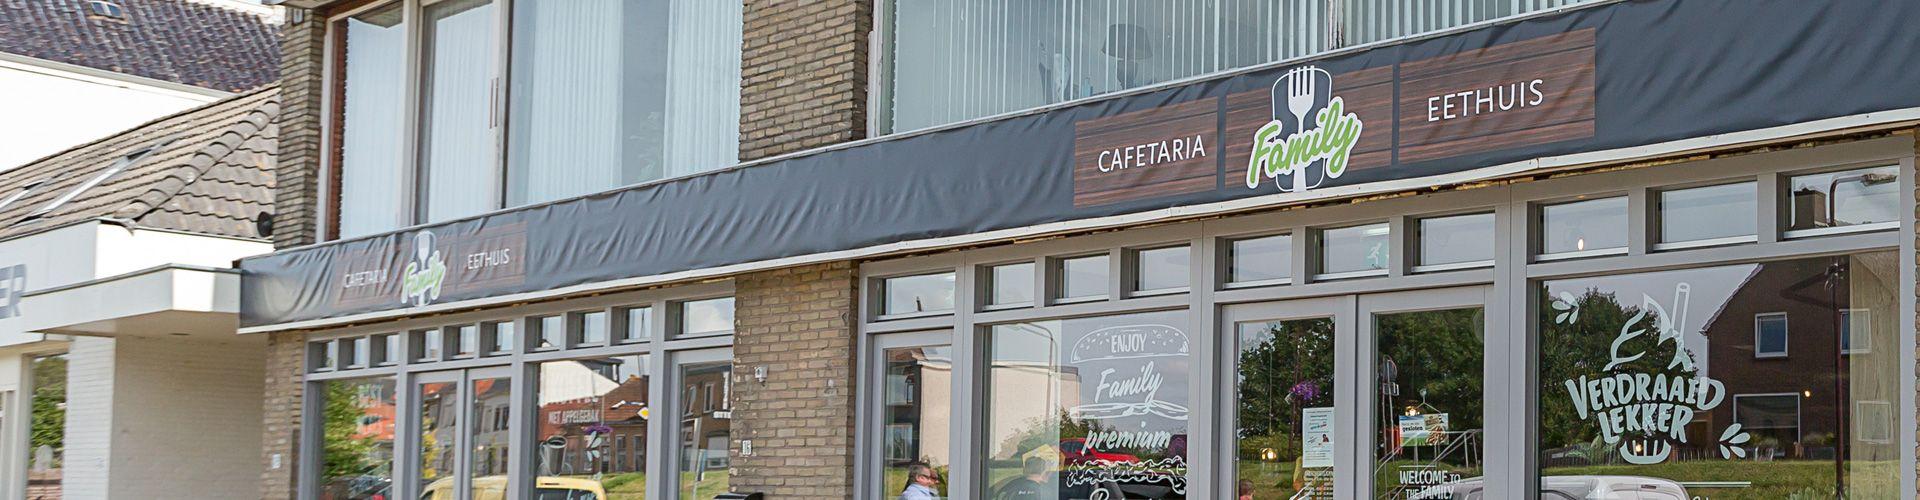 Eethuis Cafetaria Family